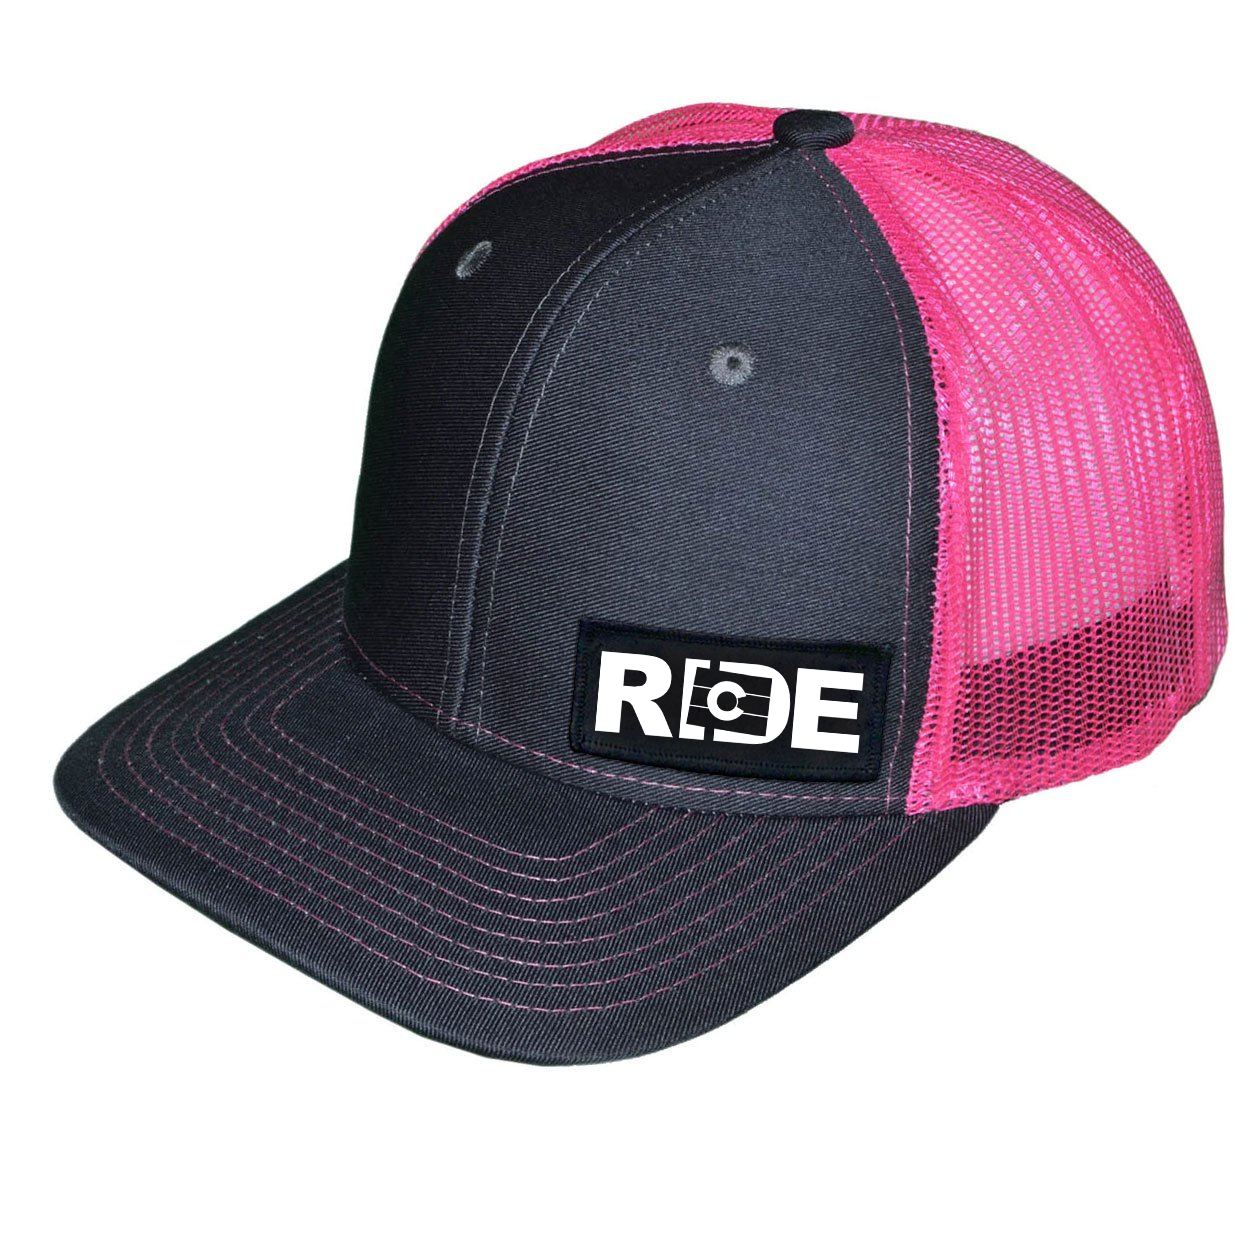 Ride Colorado Night Out Woven Patch Snapback Trucker Hat Charcoal/Neon Pink (White Logo)